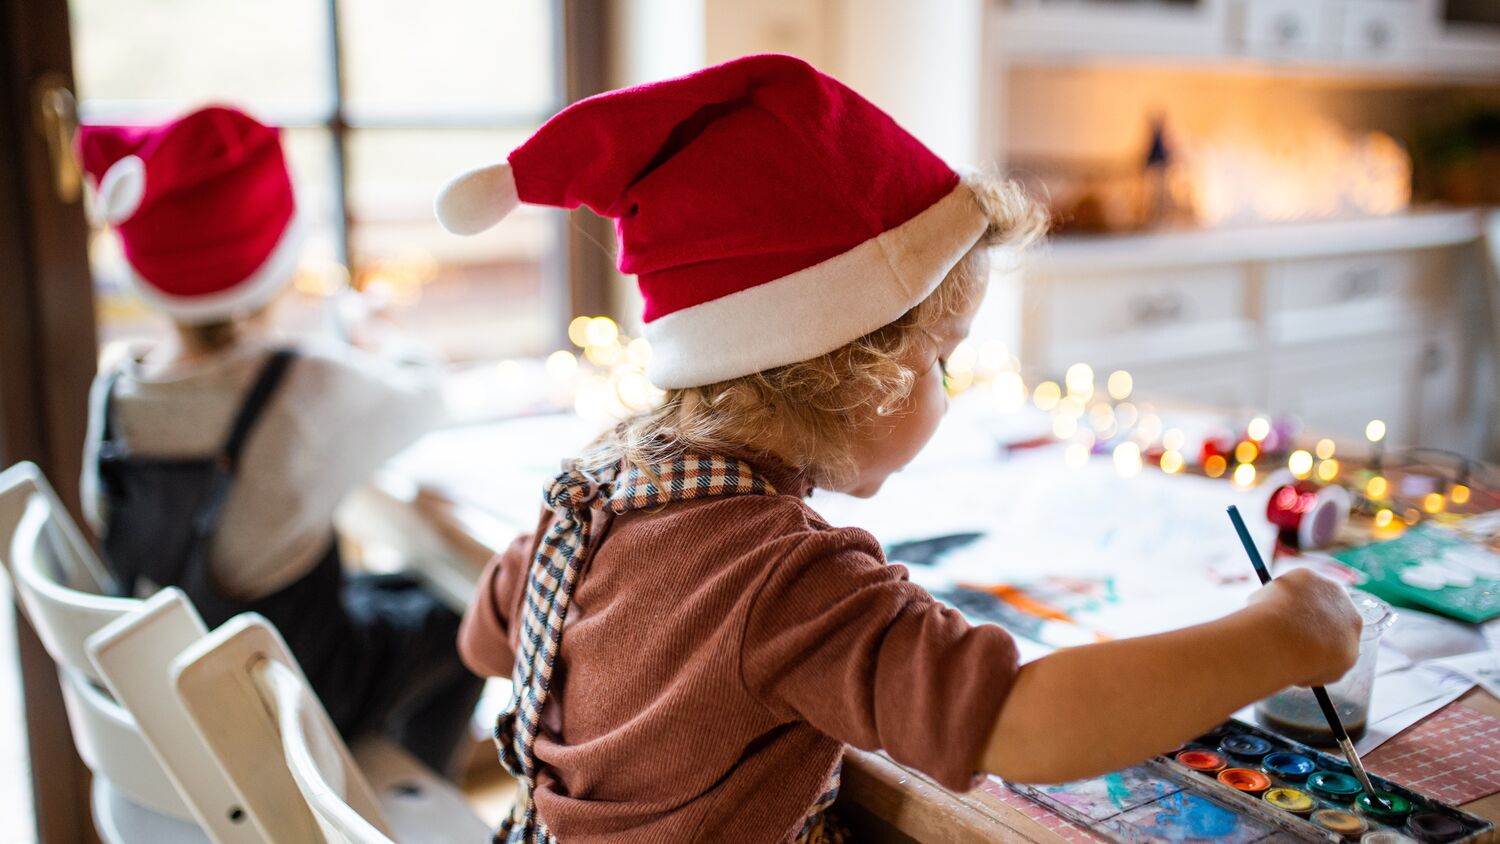 Two young children wearing Santa hats sit at a low table, with their backs to the camera. The child nearest the camera is painting.